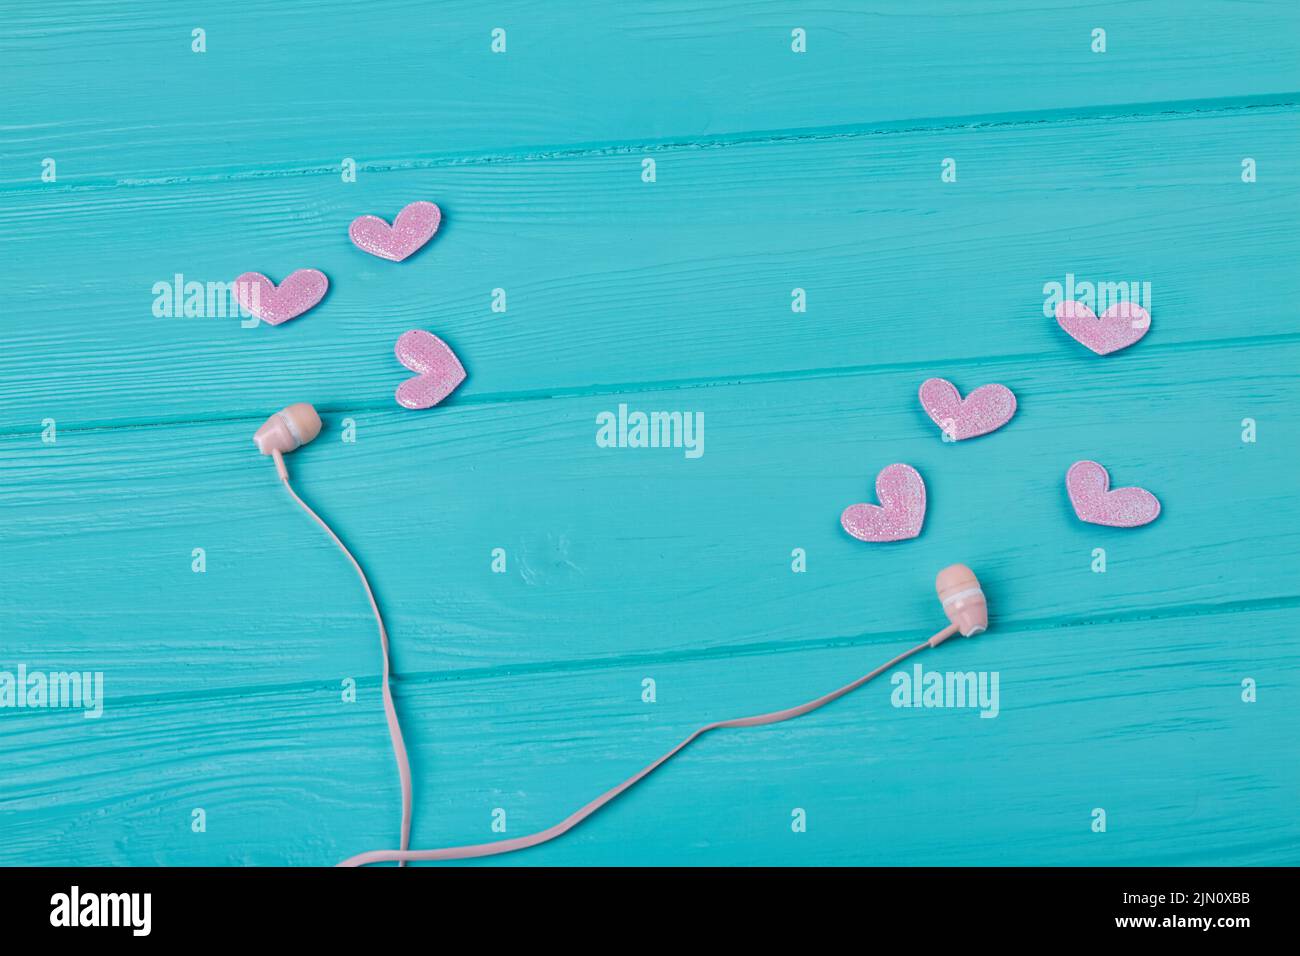 Earphones and pink hearts on blue wooden desk. Love music concept. Stock Photo